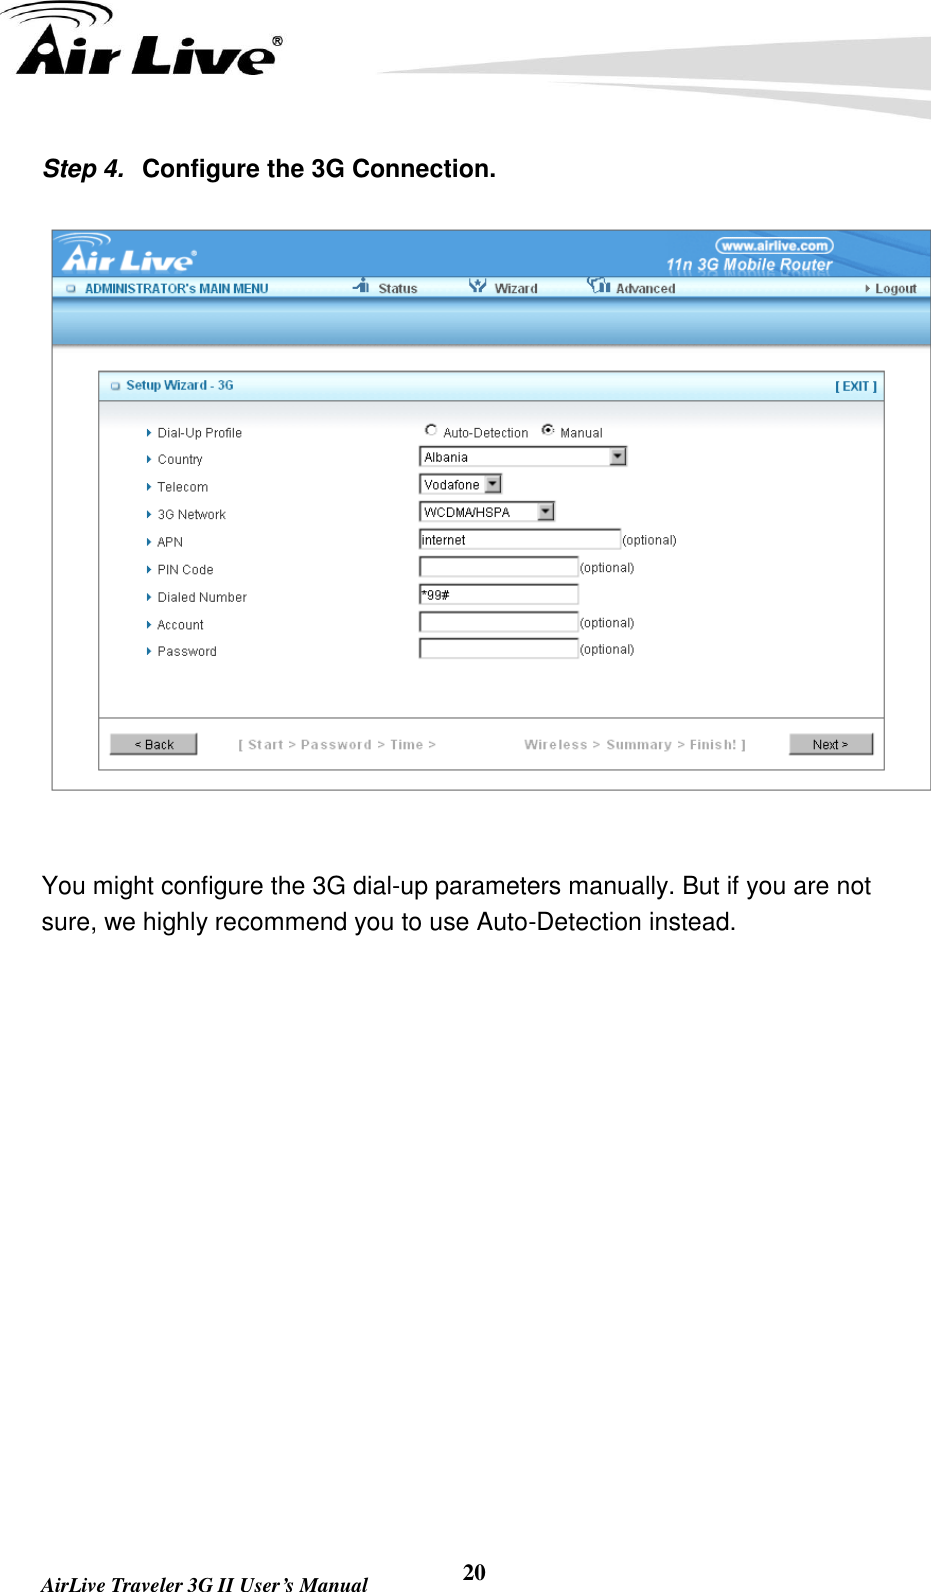   AirLive Traveler 3G II User’s Manual 20 Step 4.  Configure the 3G Connection.   You might configure the 3G dial-up parameters manually. But if you are not sure, we highly recommend you to use Auto-Detection instead.          